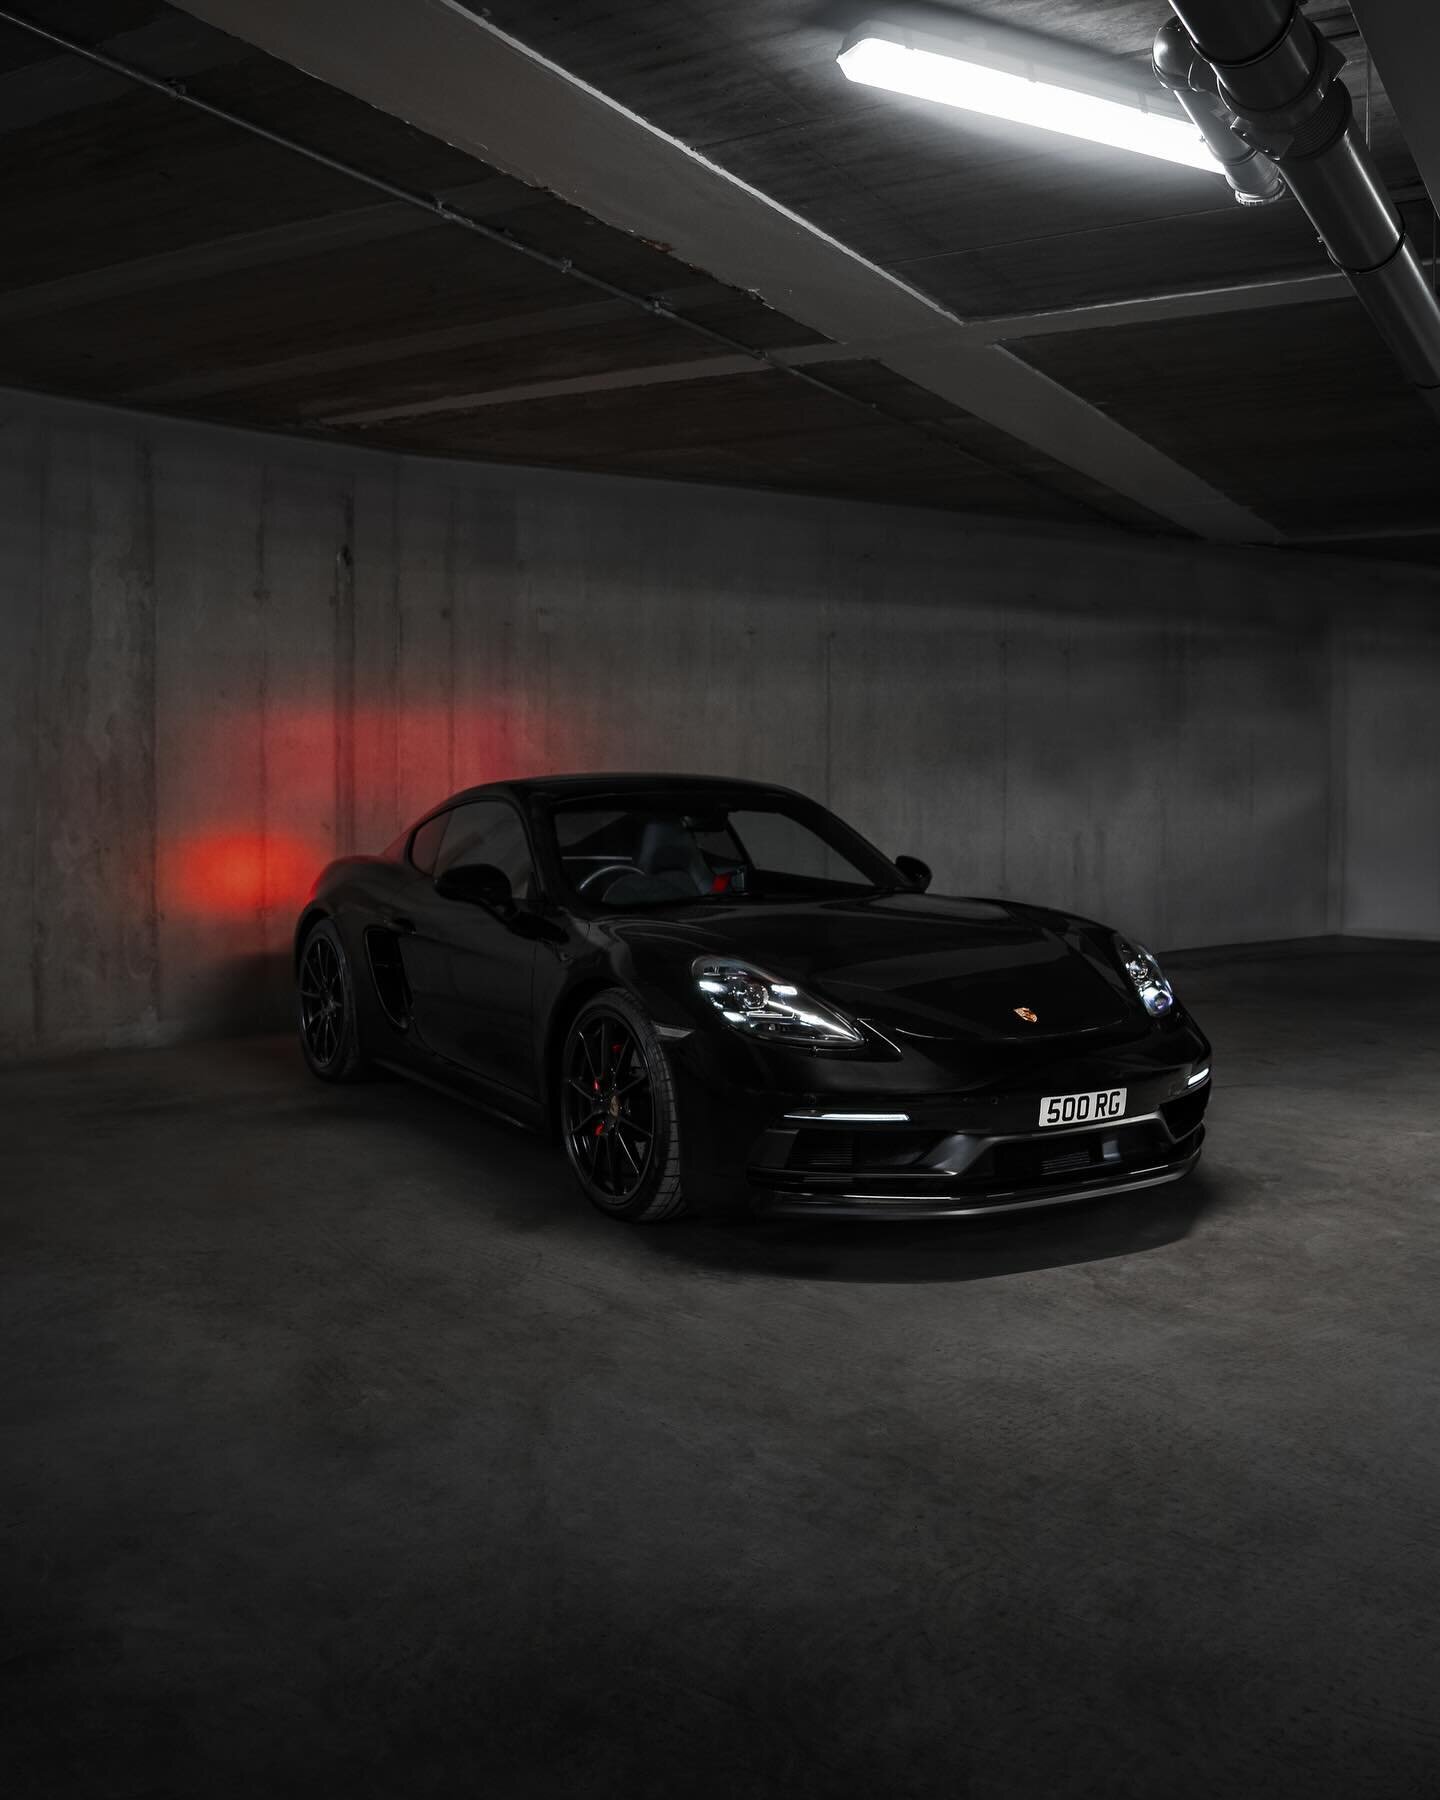 A recent shoot with this blacked out @porsche 718 GTS

Really enjoyed trying my hand at some light painting, although probably not the best to try on a black car to begin with. 

Really happy with how these came out - next time, light painting outdoo